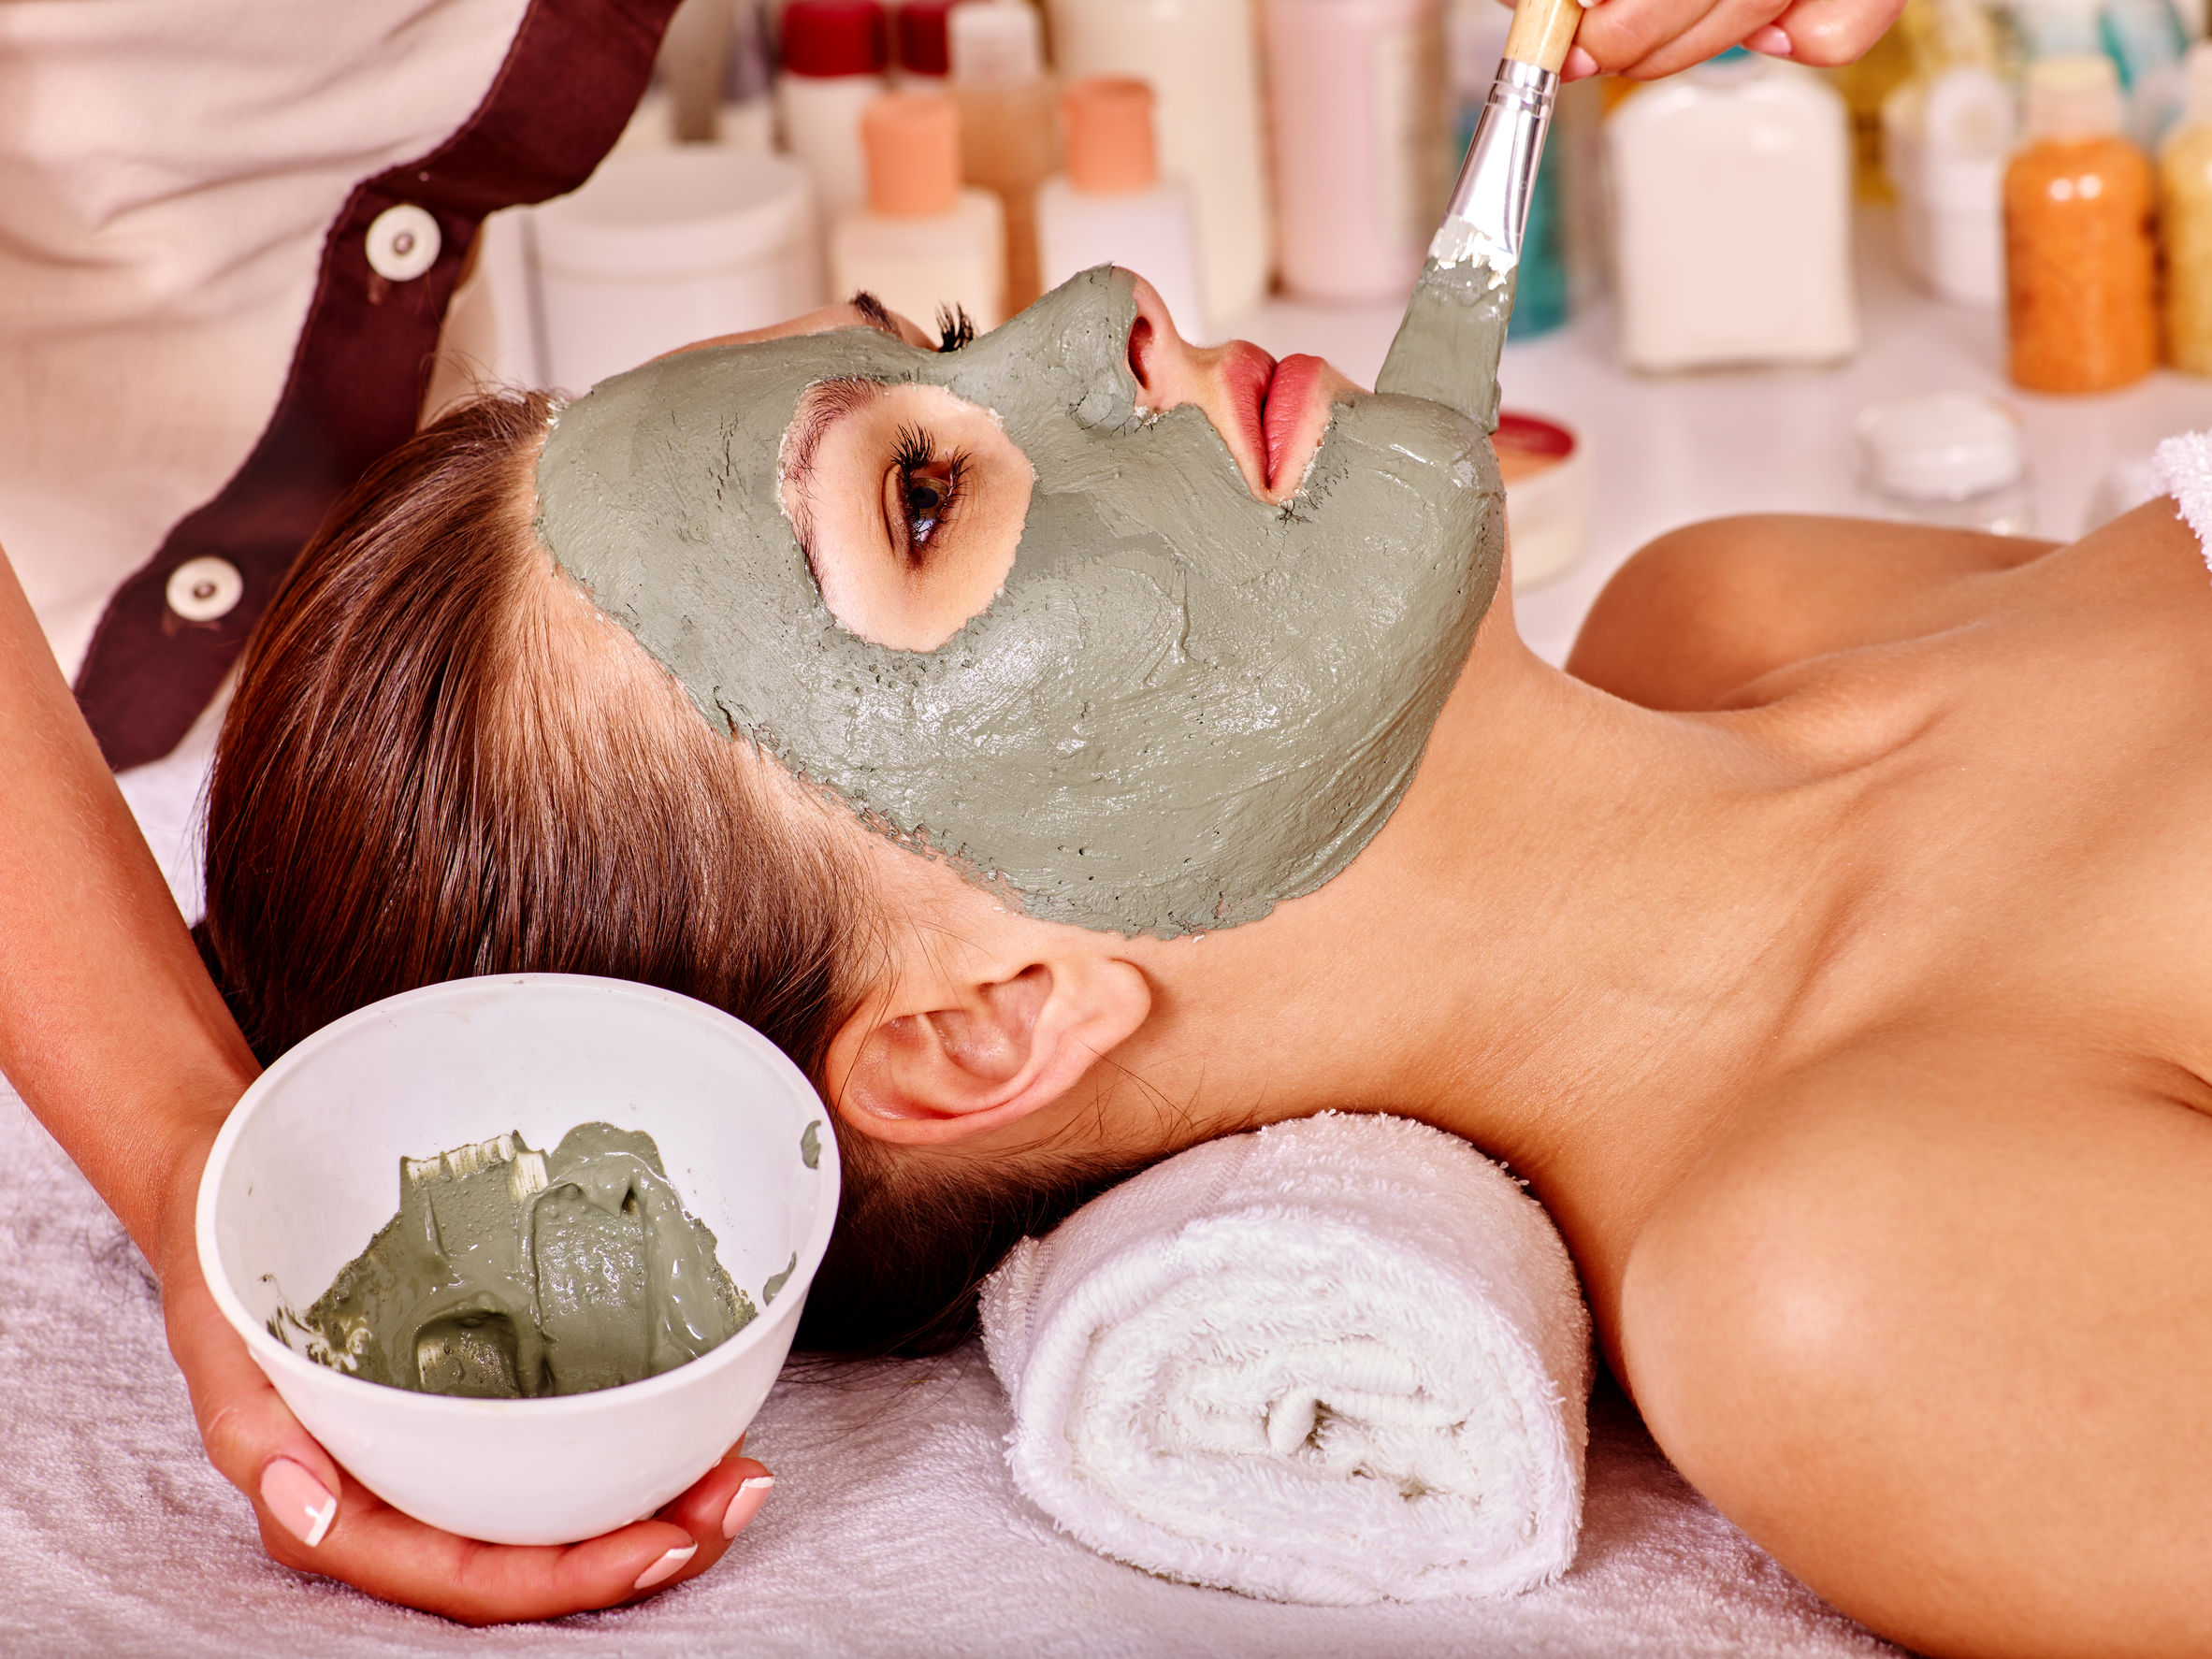 This service can be upgraded with a facial mask and extractions for pore cleansing and skin tightening.&nbsp;